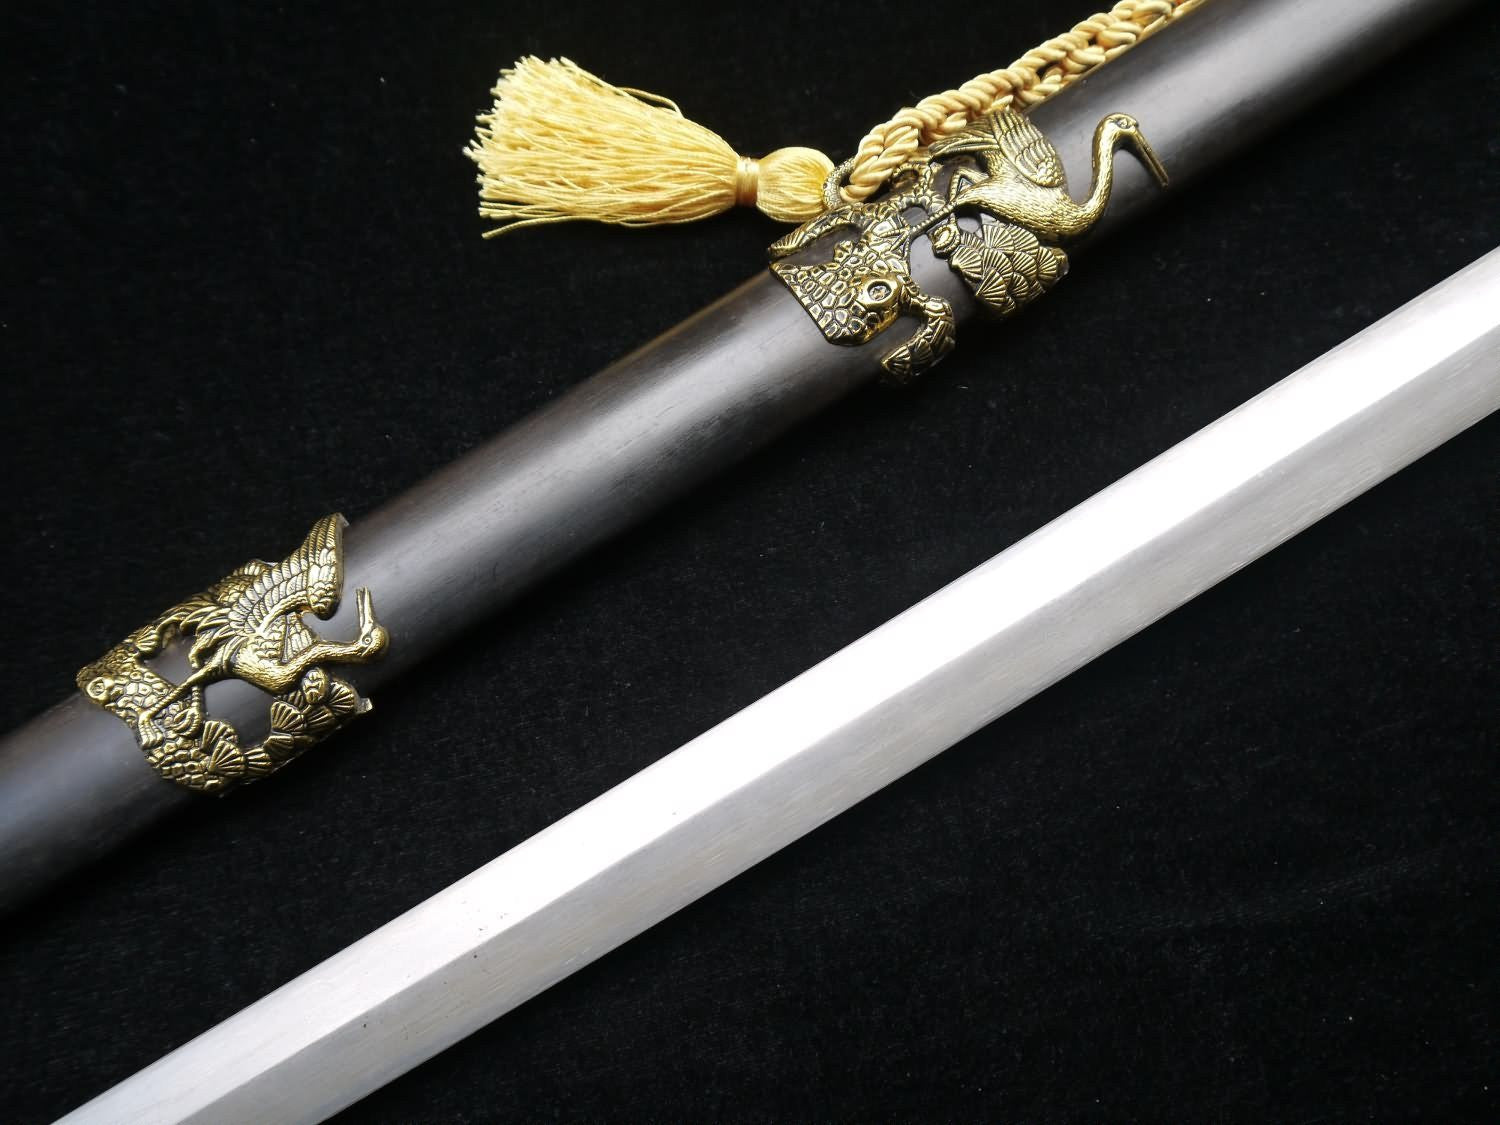 Songhe sword,Folding pattern steel blade,Alloy fitting,Black scabbard,Length 41" - Chinese sword shop